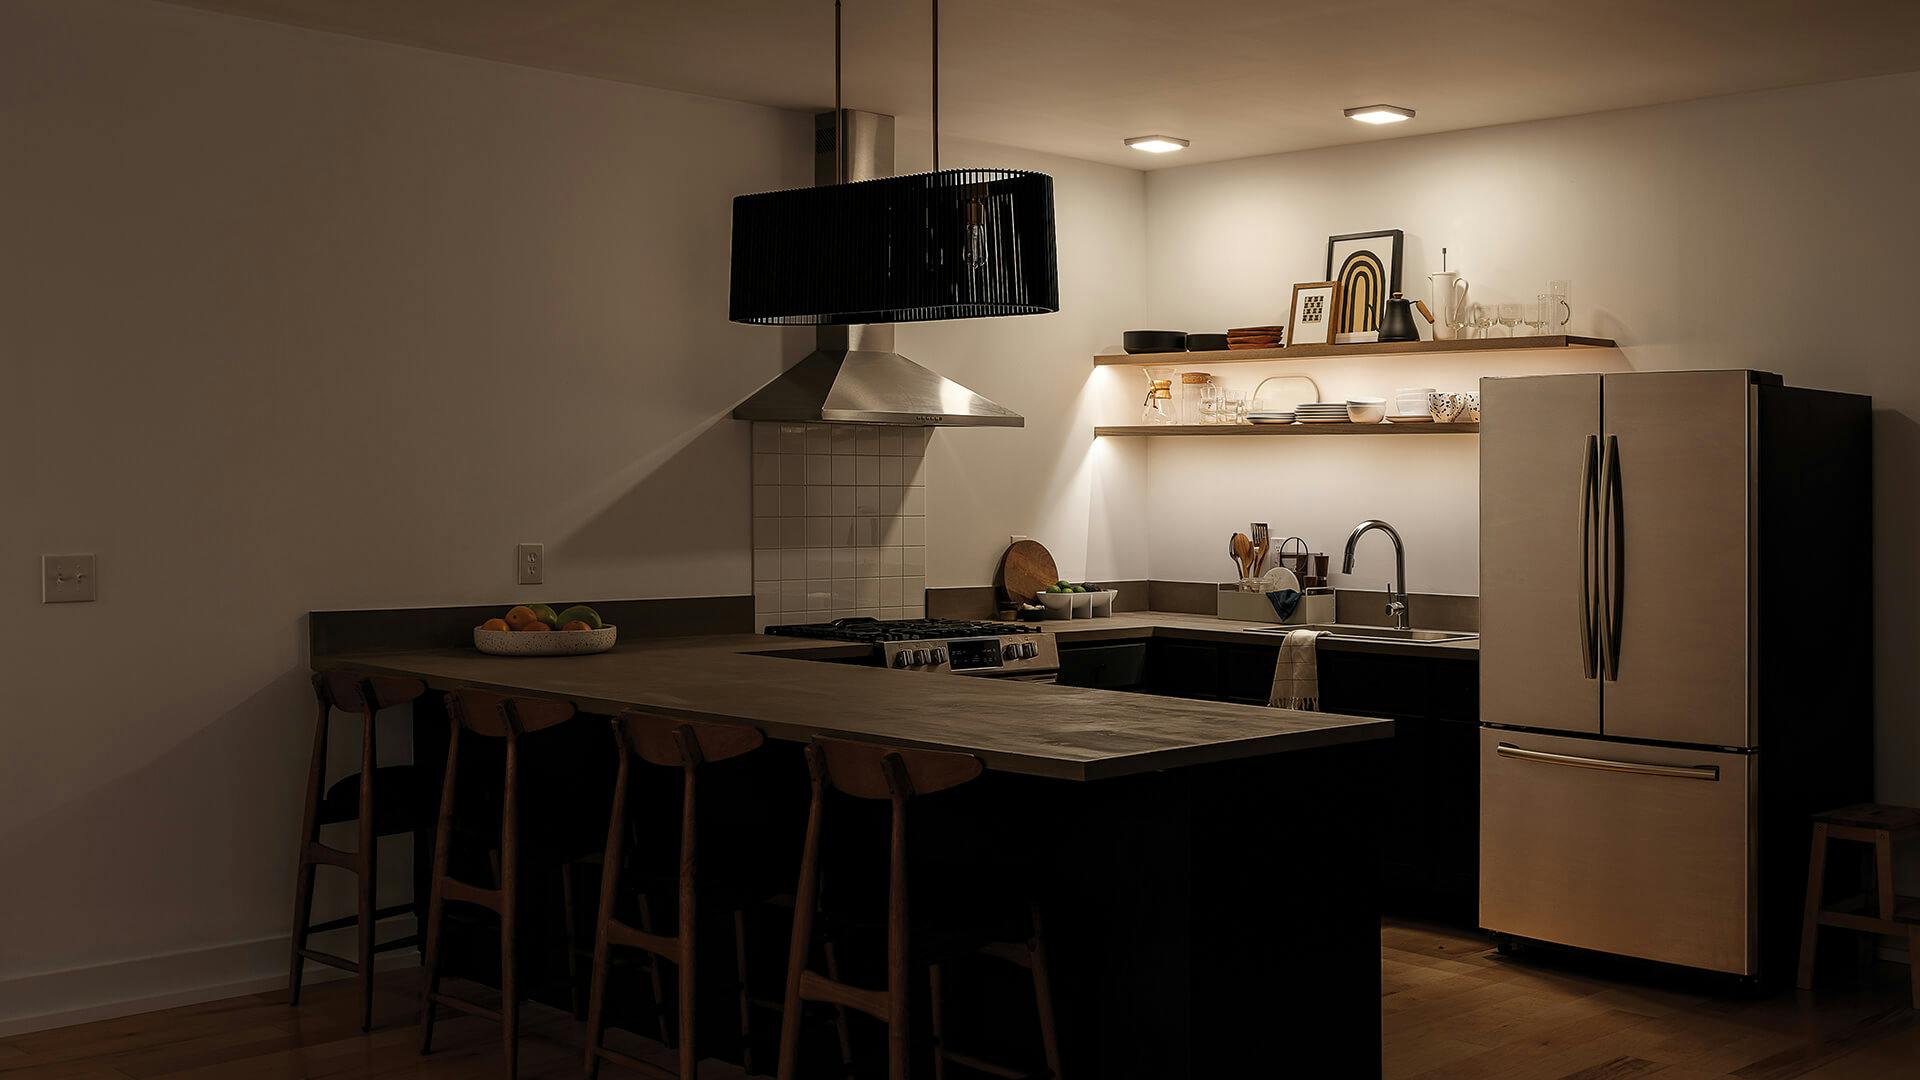 Kitchen in low-light with a Linara chandelier over the island while two Zeo and channel lights illuminate the back wall above the sink